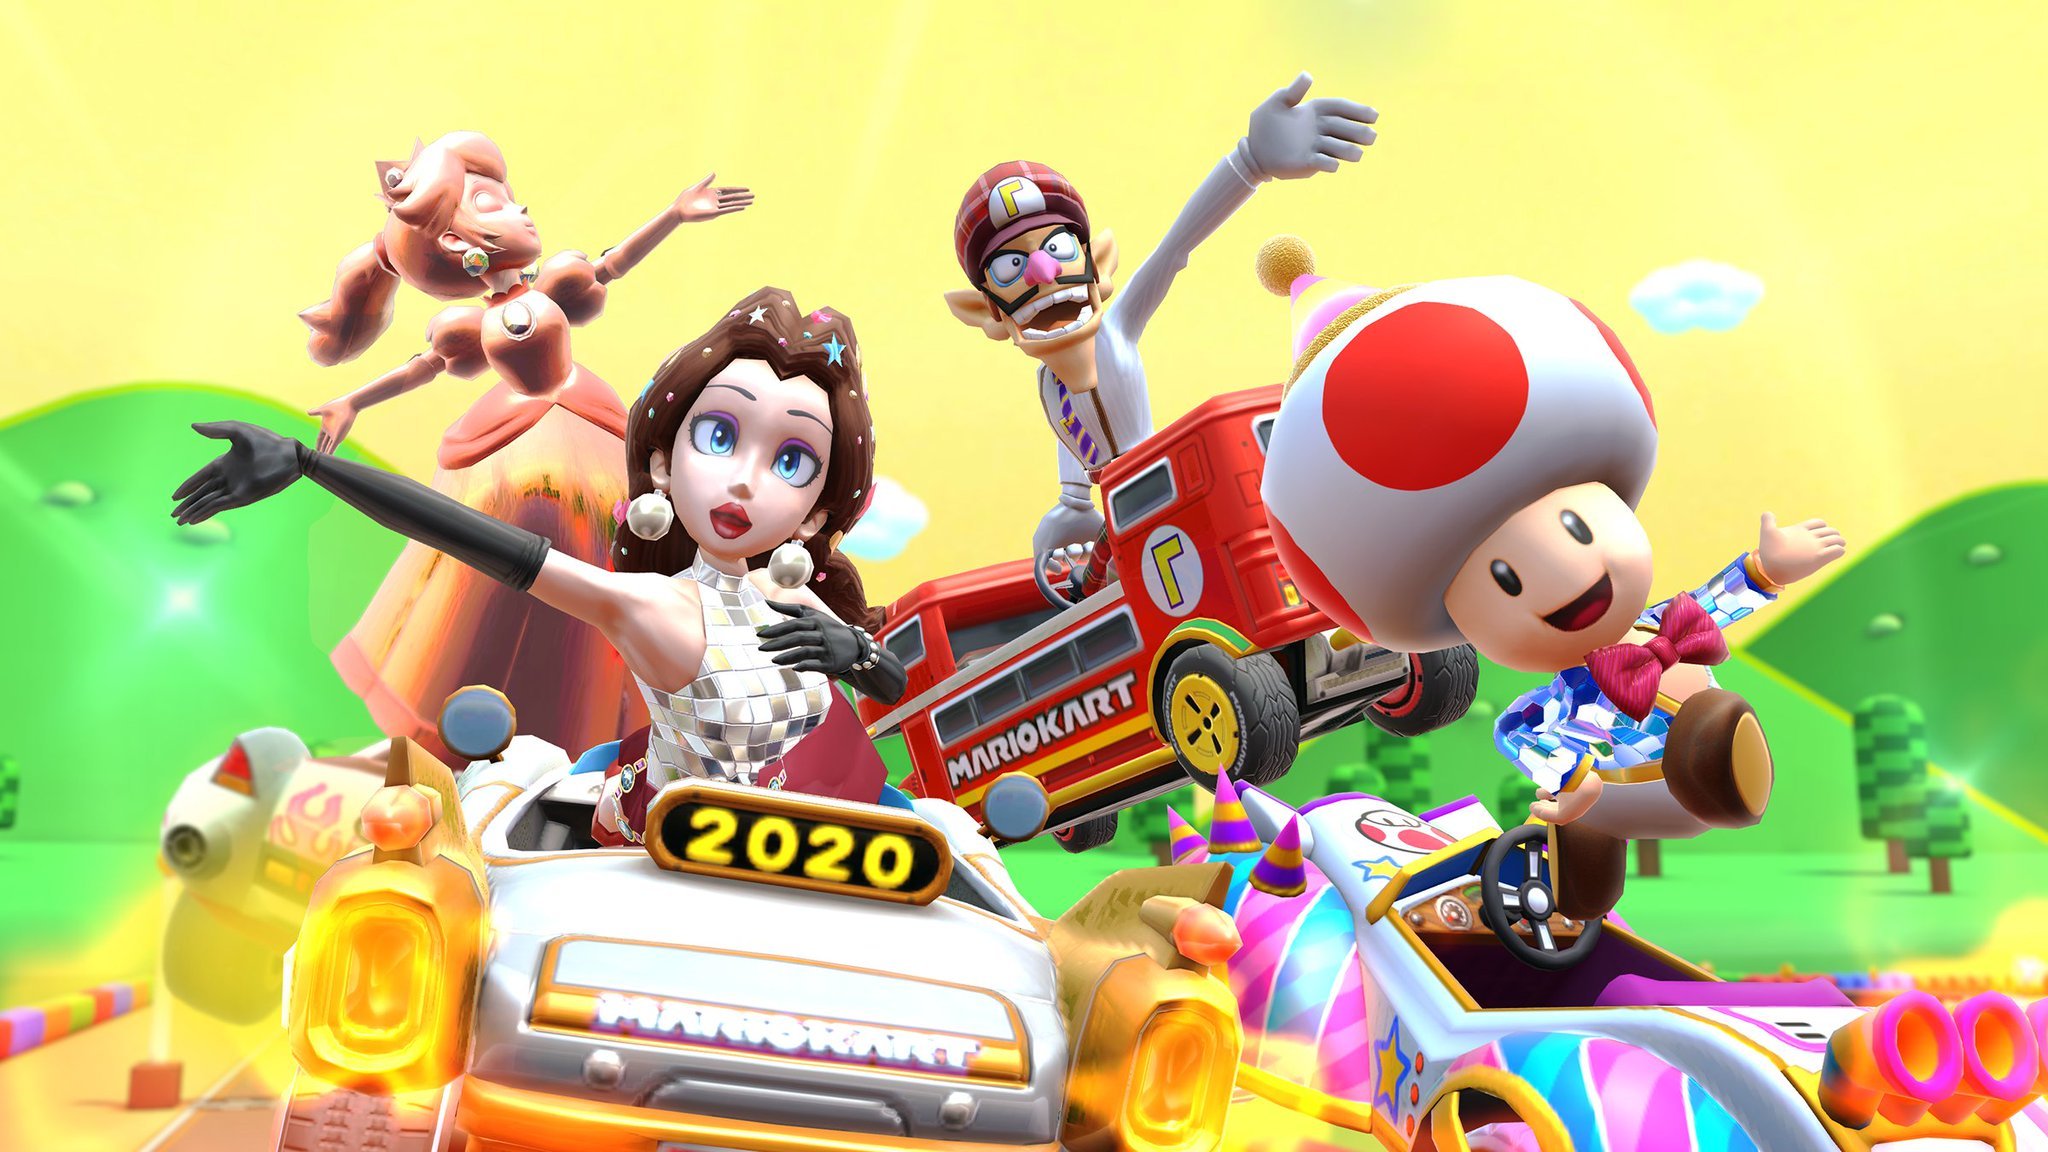 Mario Kart Tour (Party Time), Pink Gold Peach, and two other drivers return alongside their favorite karts! Which one is your favorite? #MarioKartTour